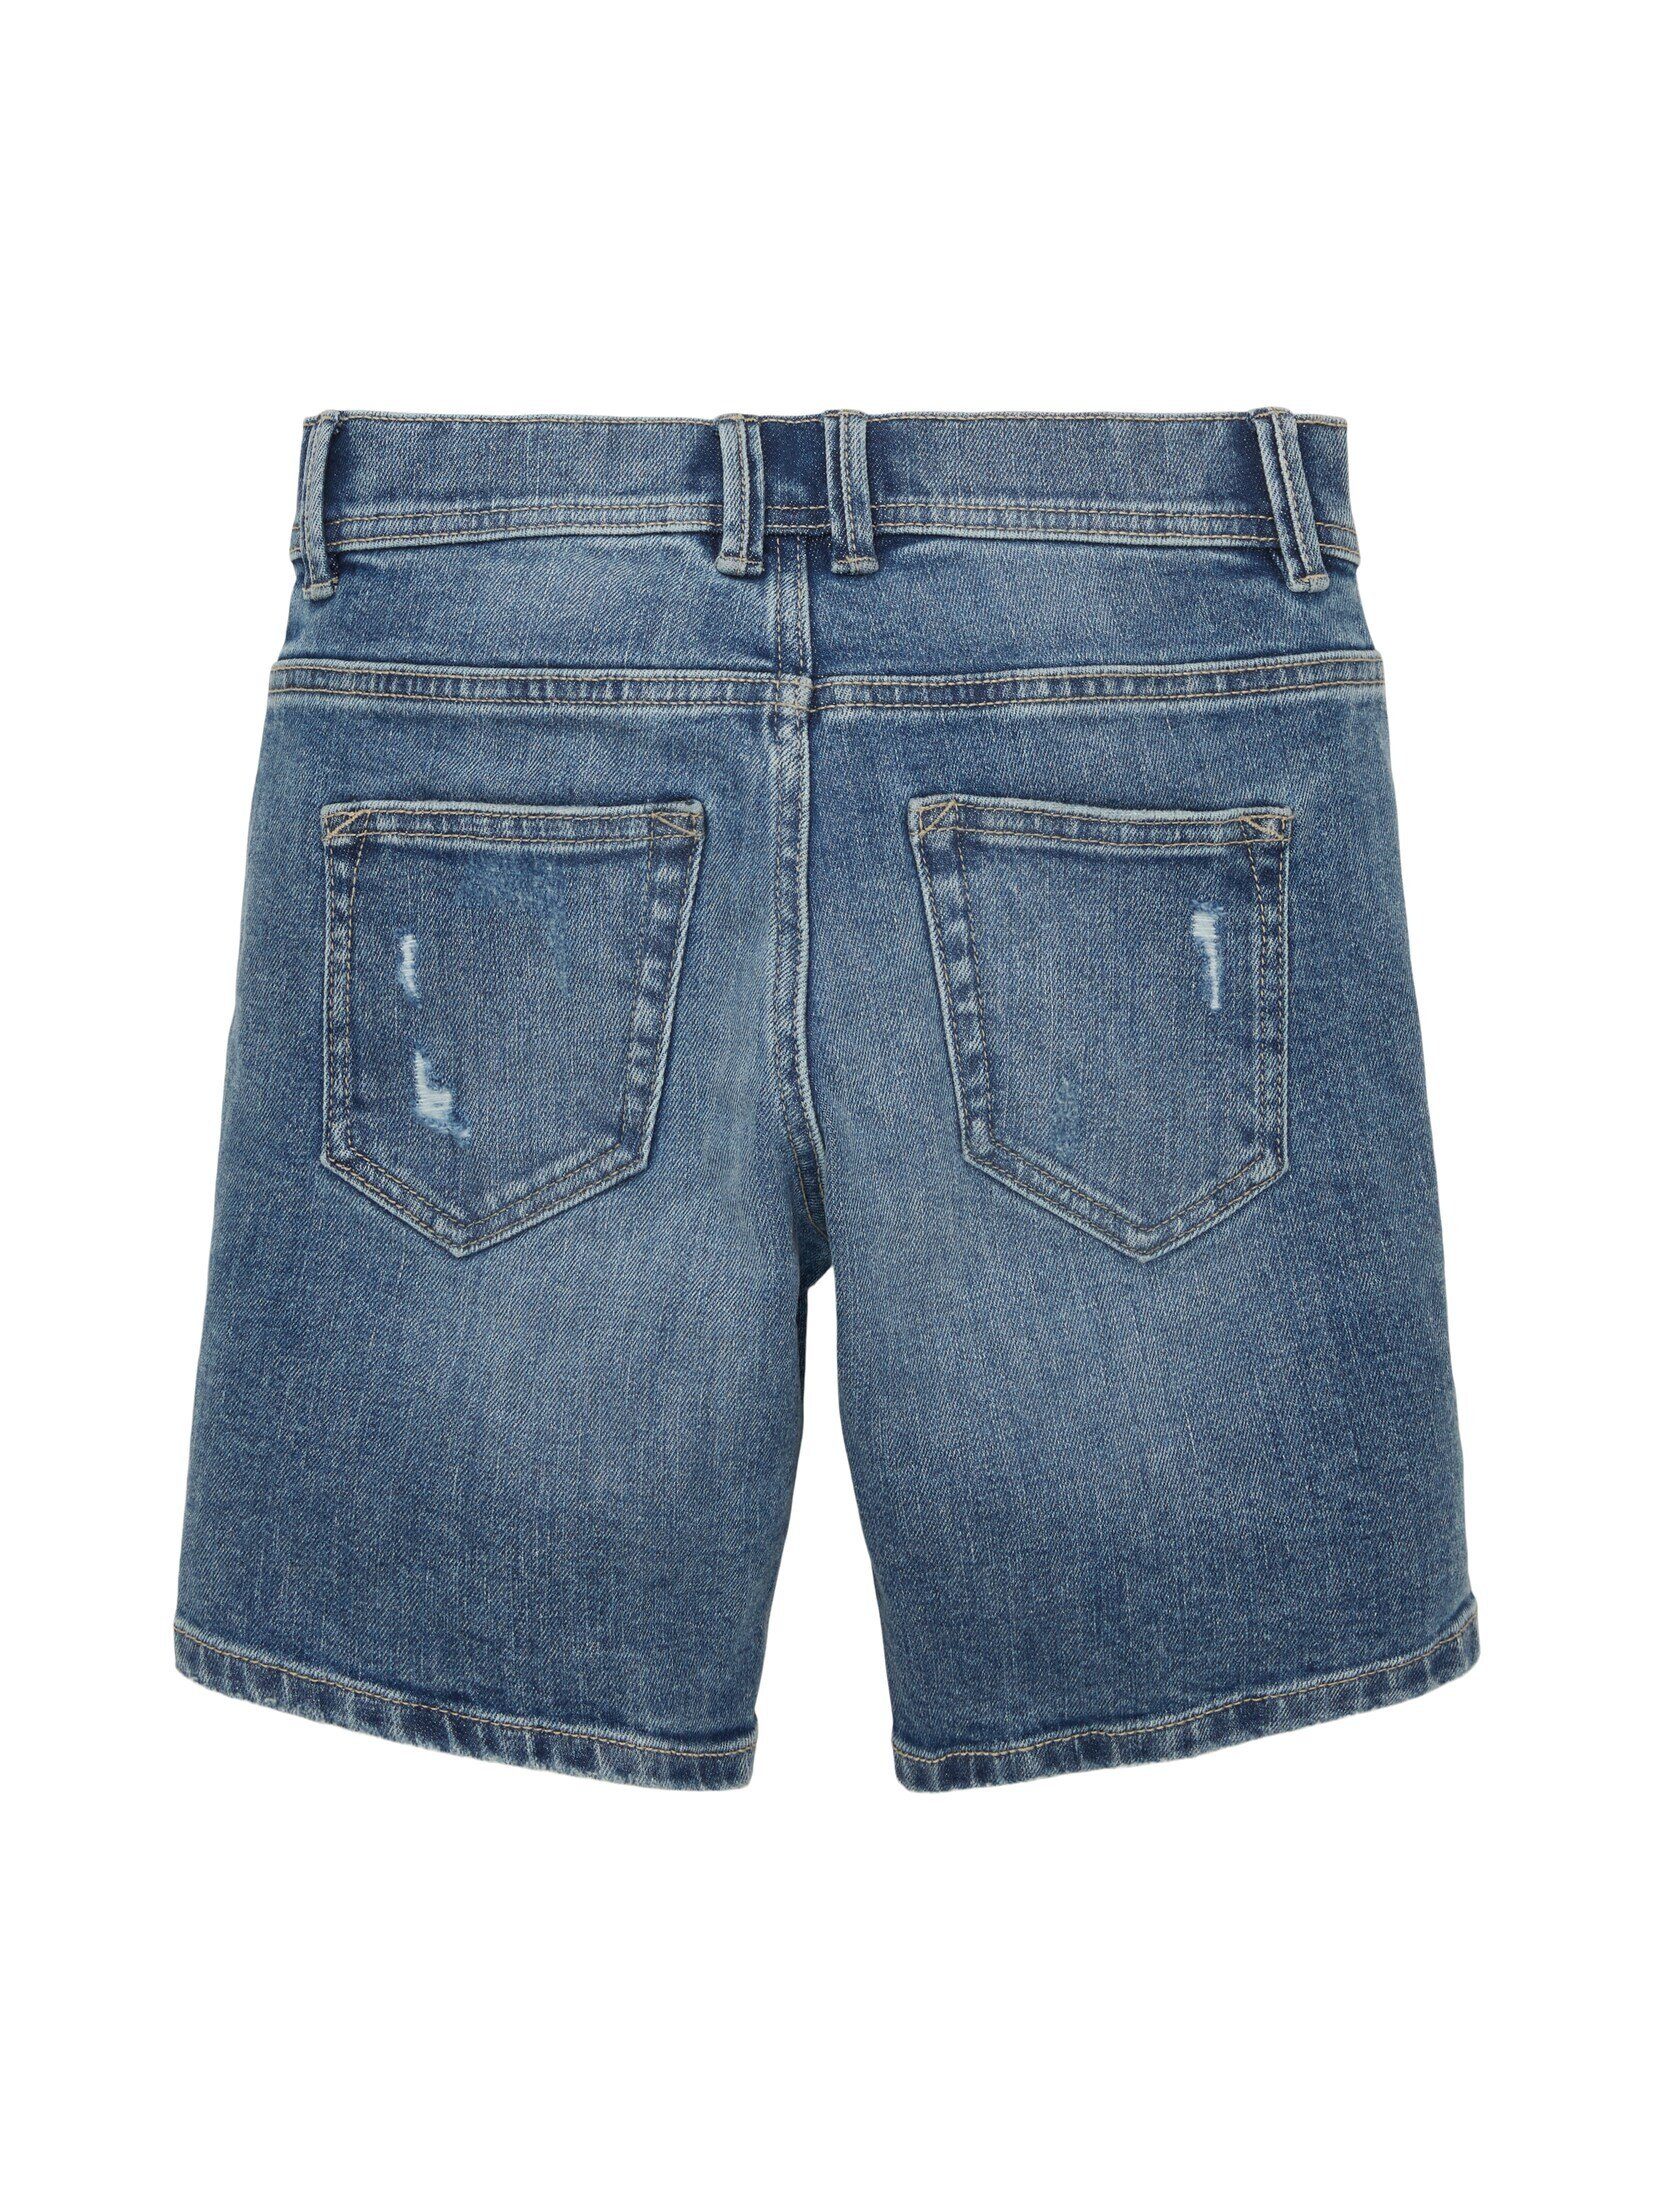 TOM TAILOR Jeansshorts Jeansshorts im Used-Look